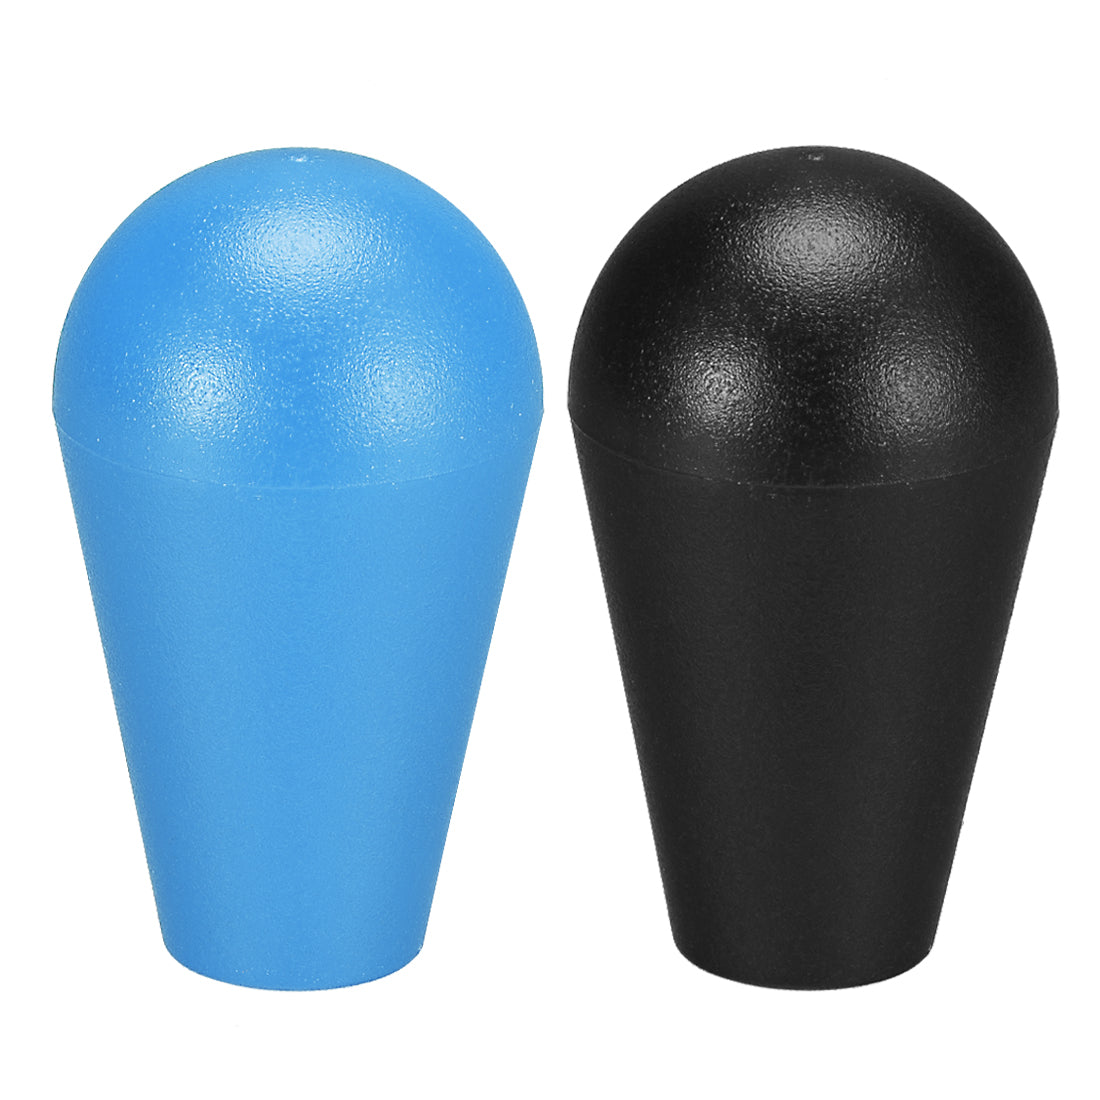 uxcell Uxcell Ellipse Oval Joystick Head Rocker Ball Top Handle American Type Arcade Game DIY Parts Replacement Blue Black 2Pcs